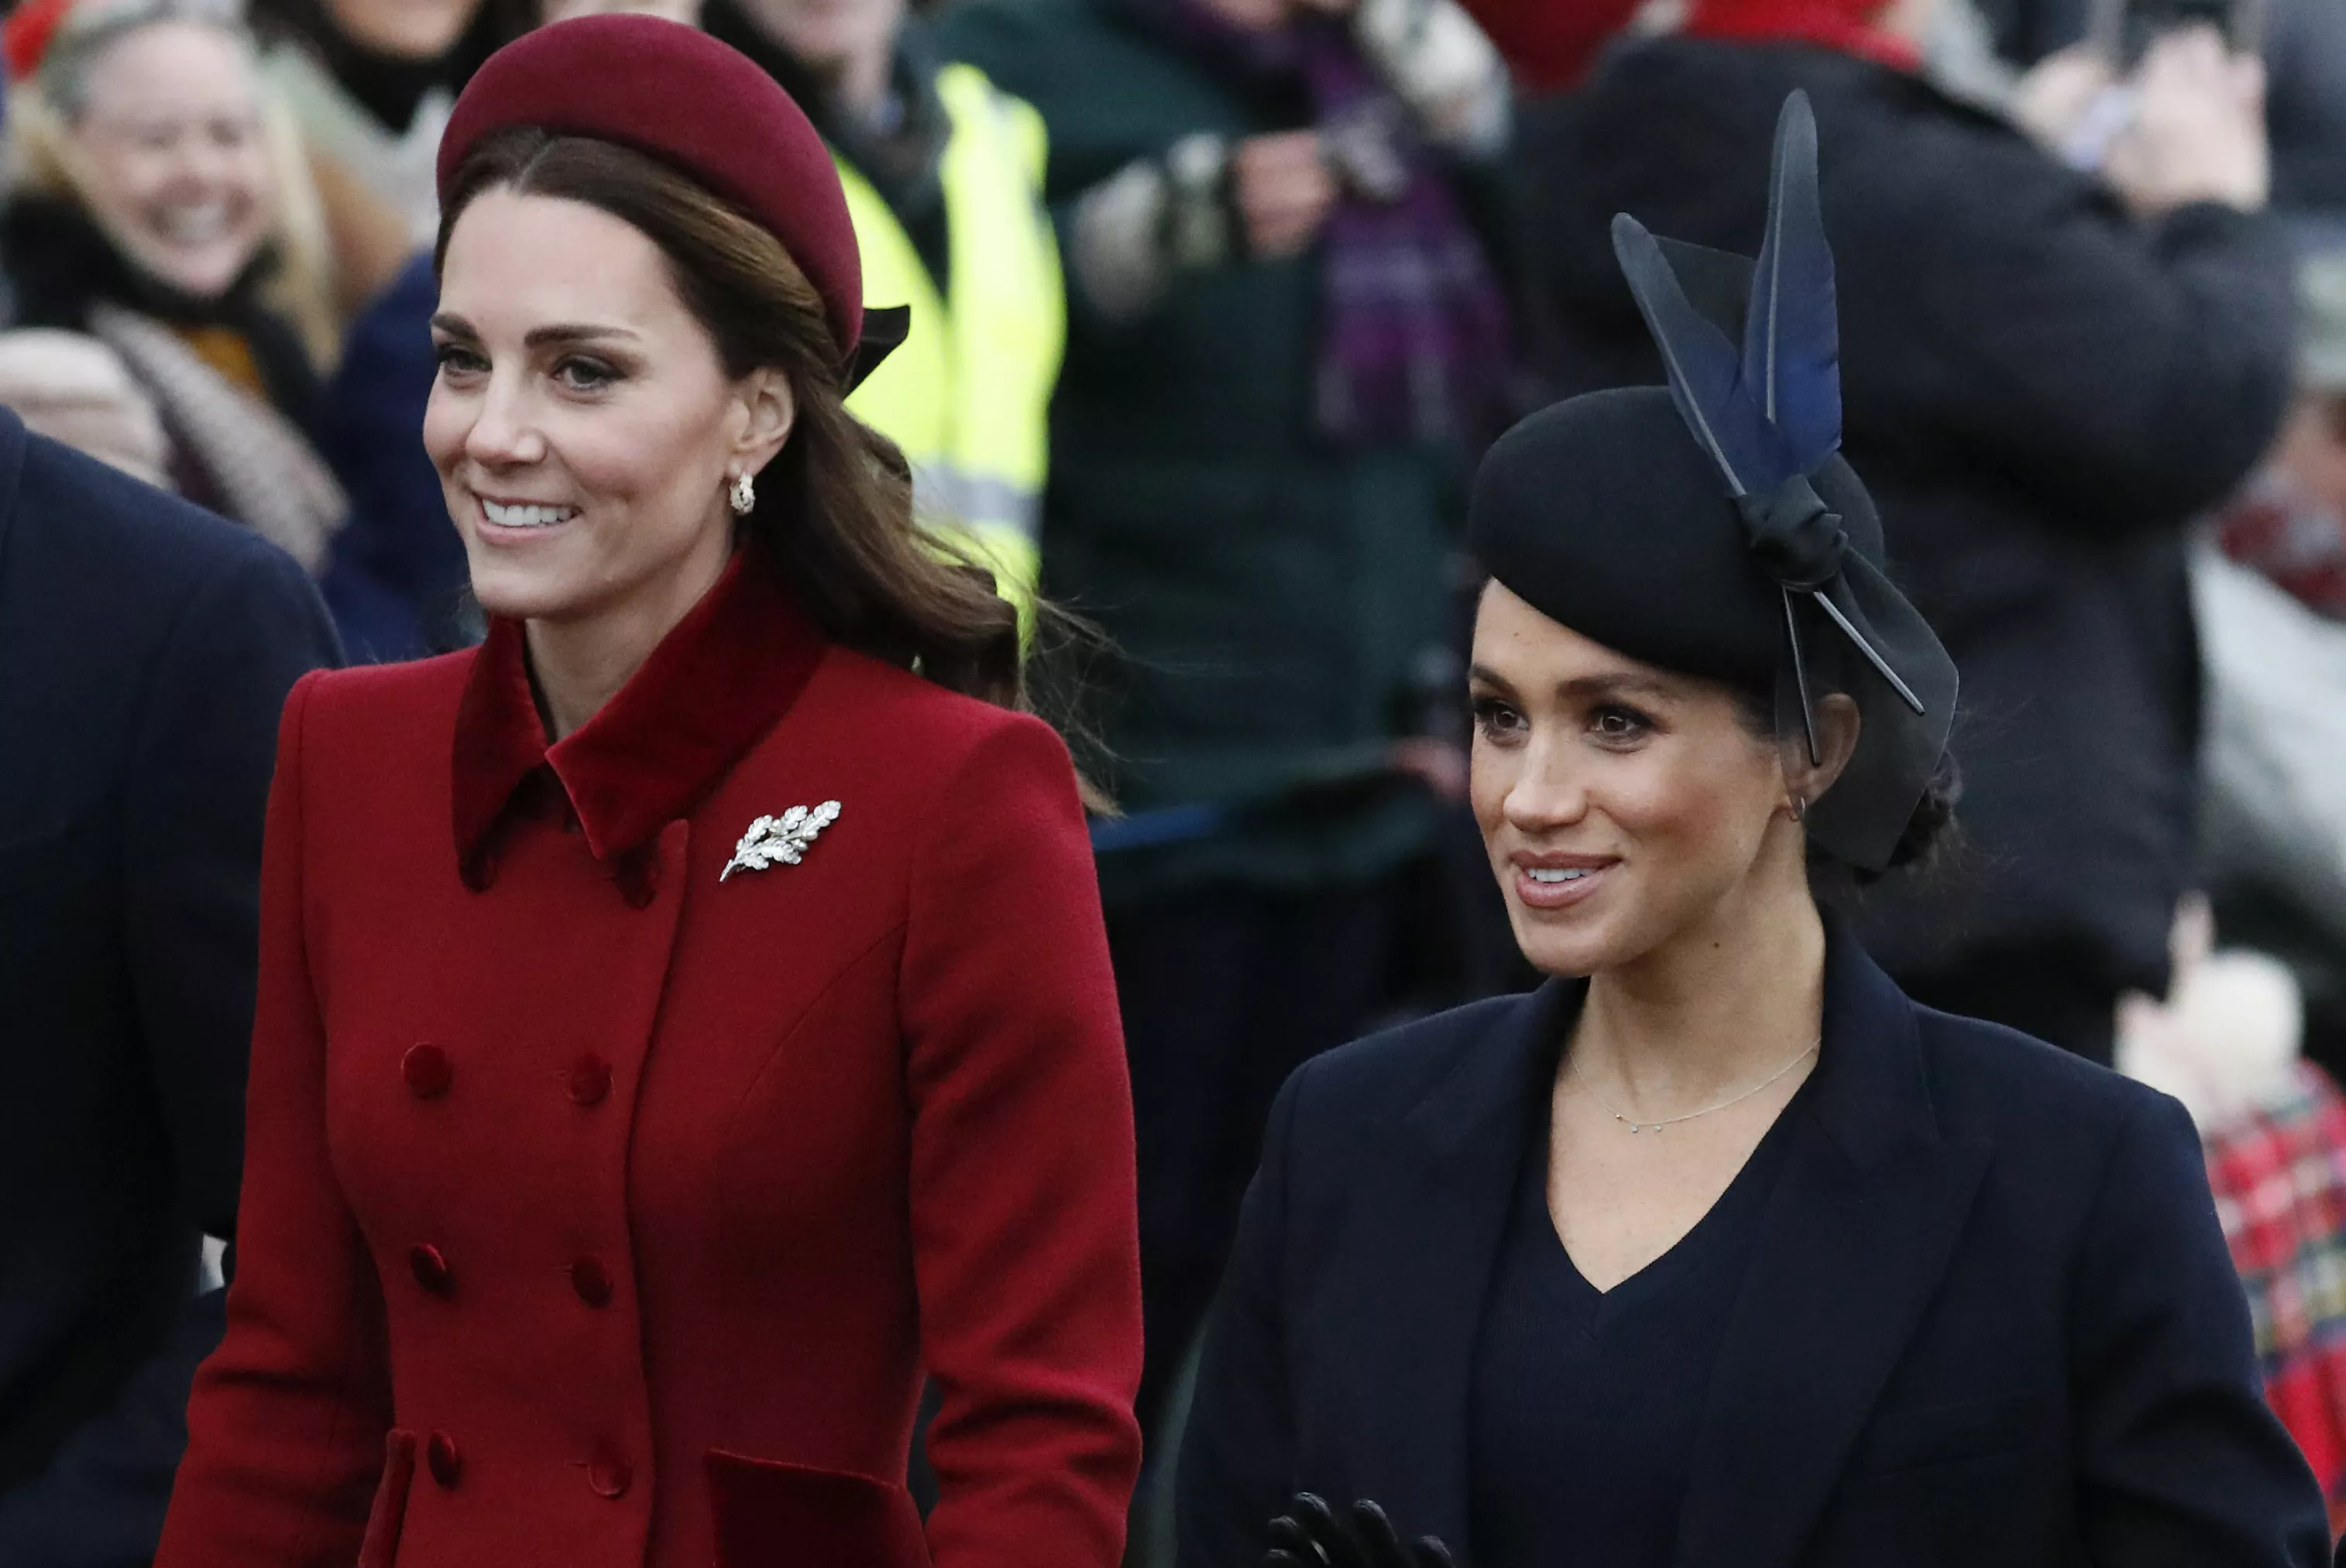 FILE - In this Tuesday, Dec. 25, 2018 file photo, Britain's Kate, Duchess of Cambridge, left, and Meghan, Duchess of Sussex arrive to attend the Christmas day service at St Mary Magdalene Church in Sandringham in Norfolk, England